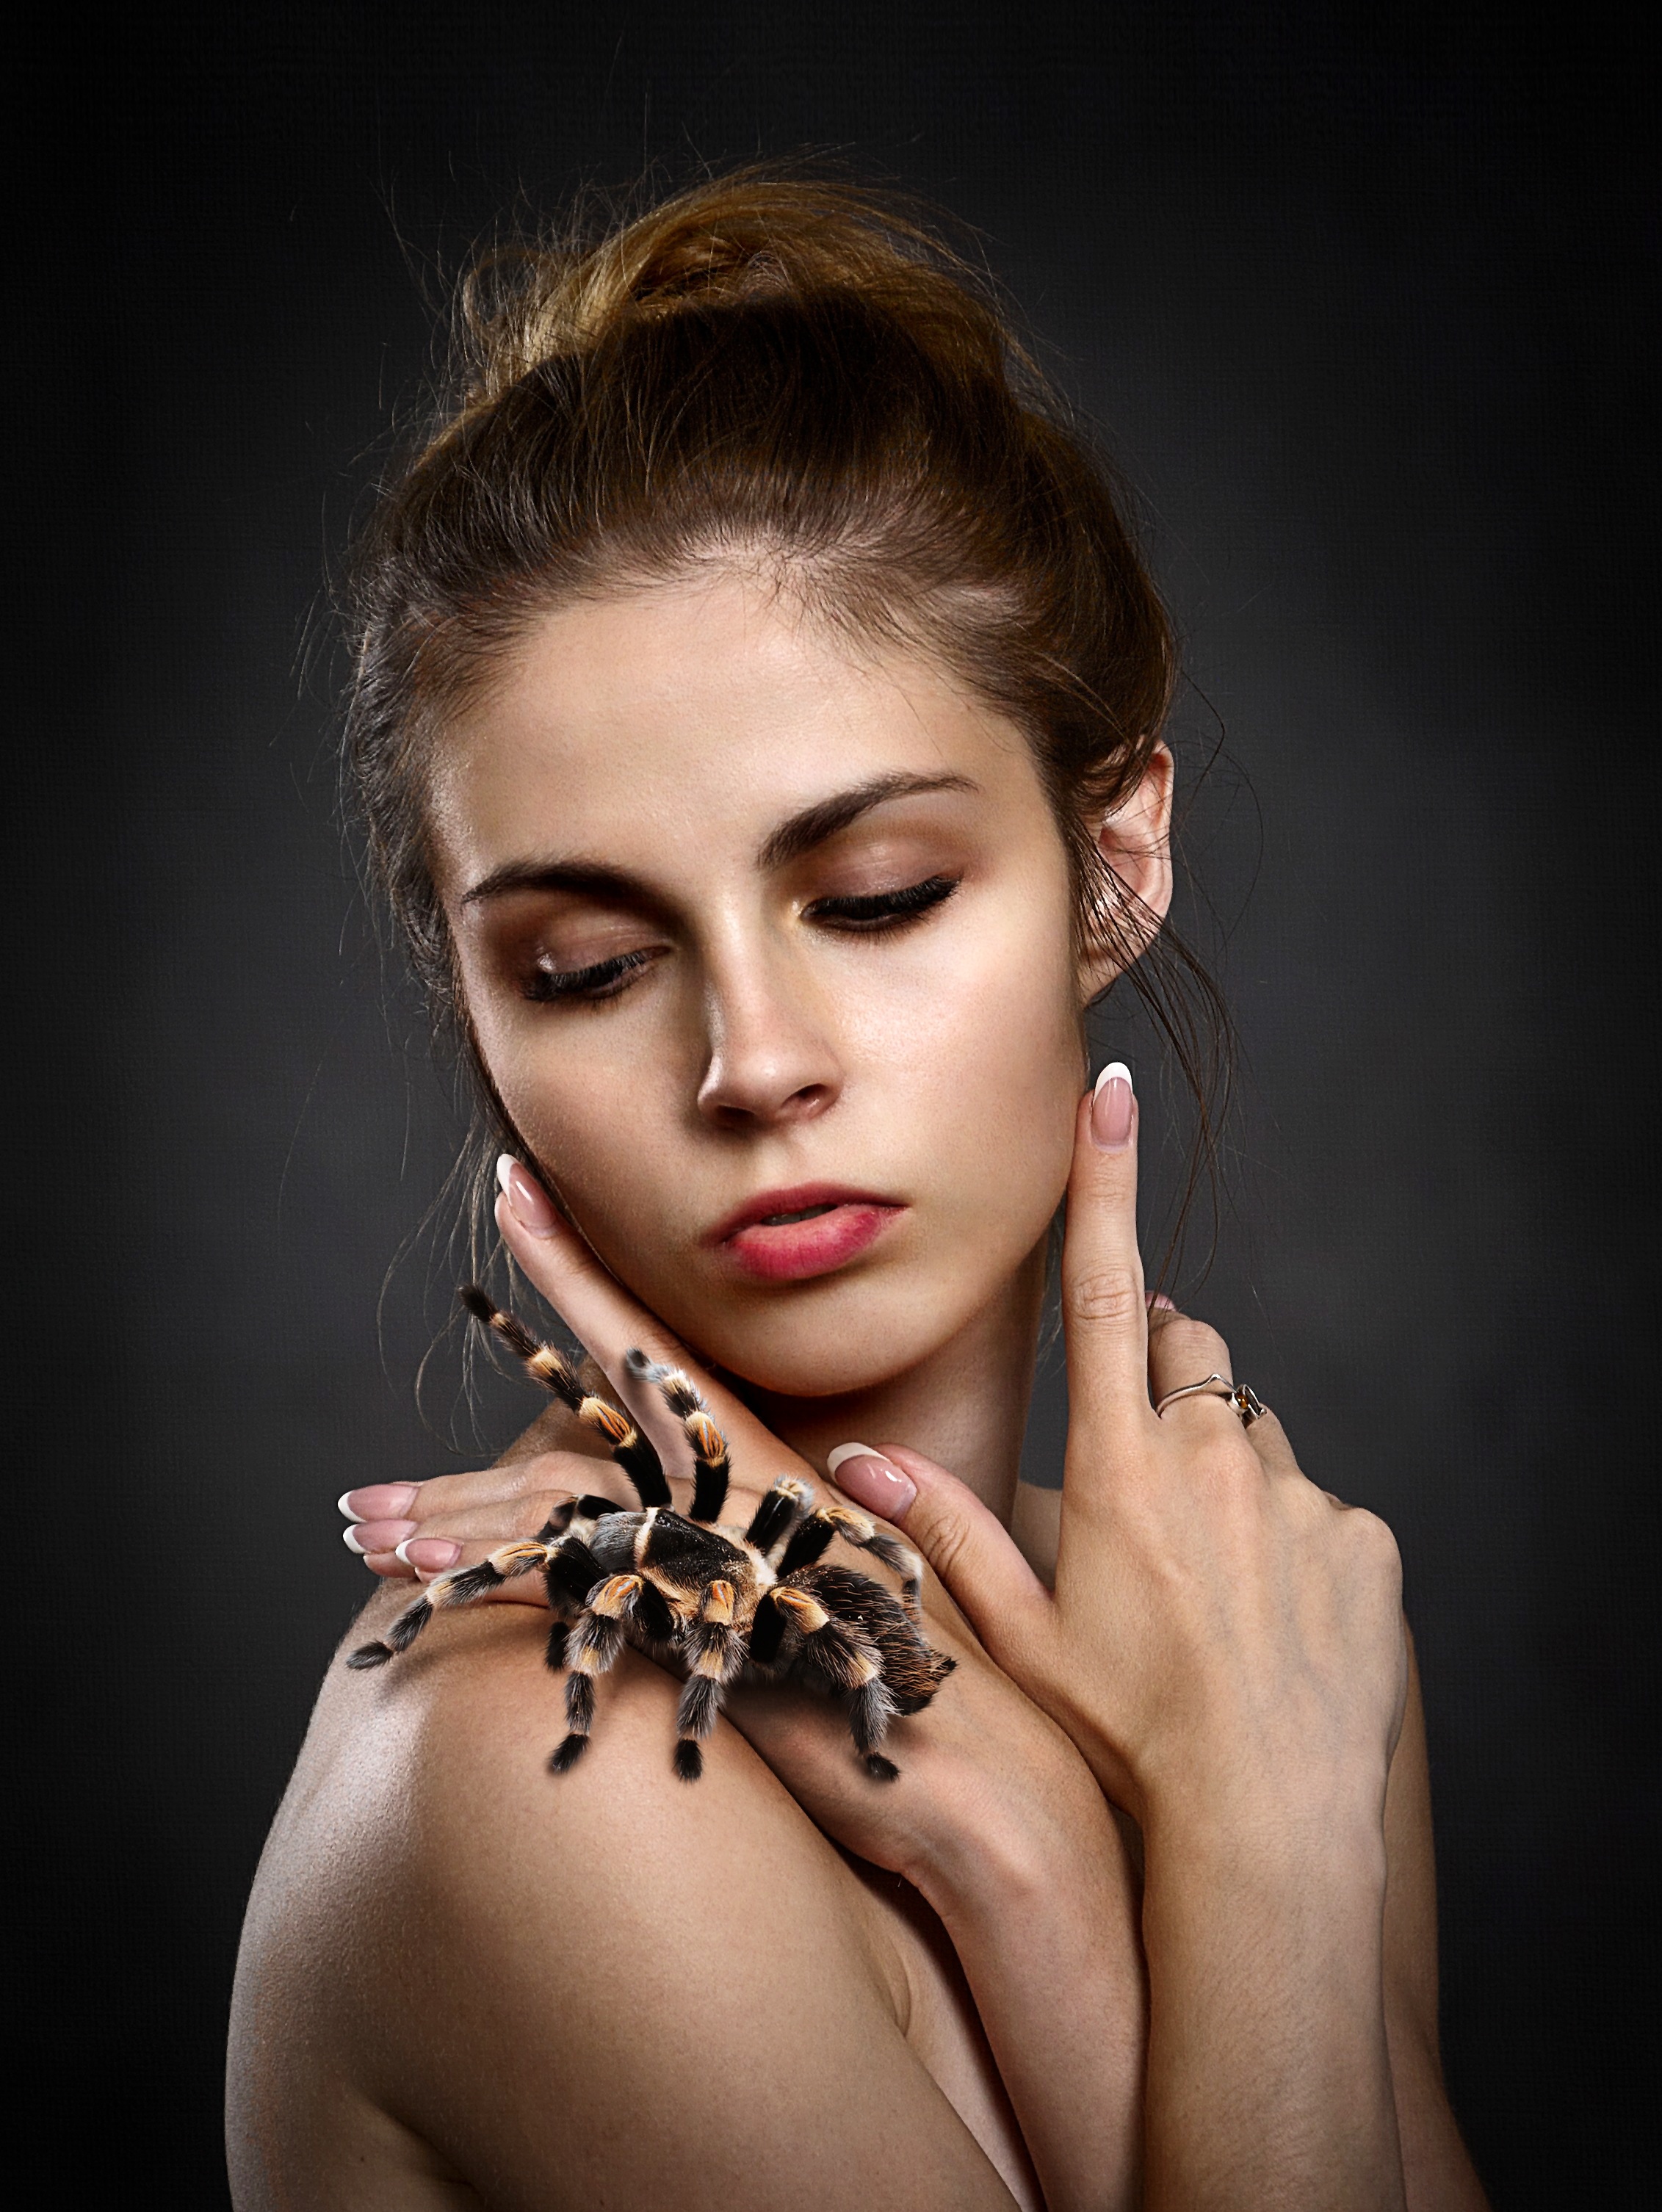 Portrait Of A Woman With Hairy Tarantula Free Image Download 